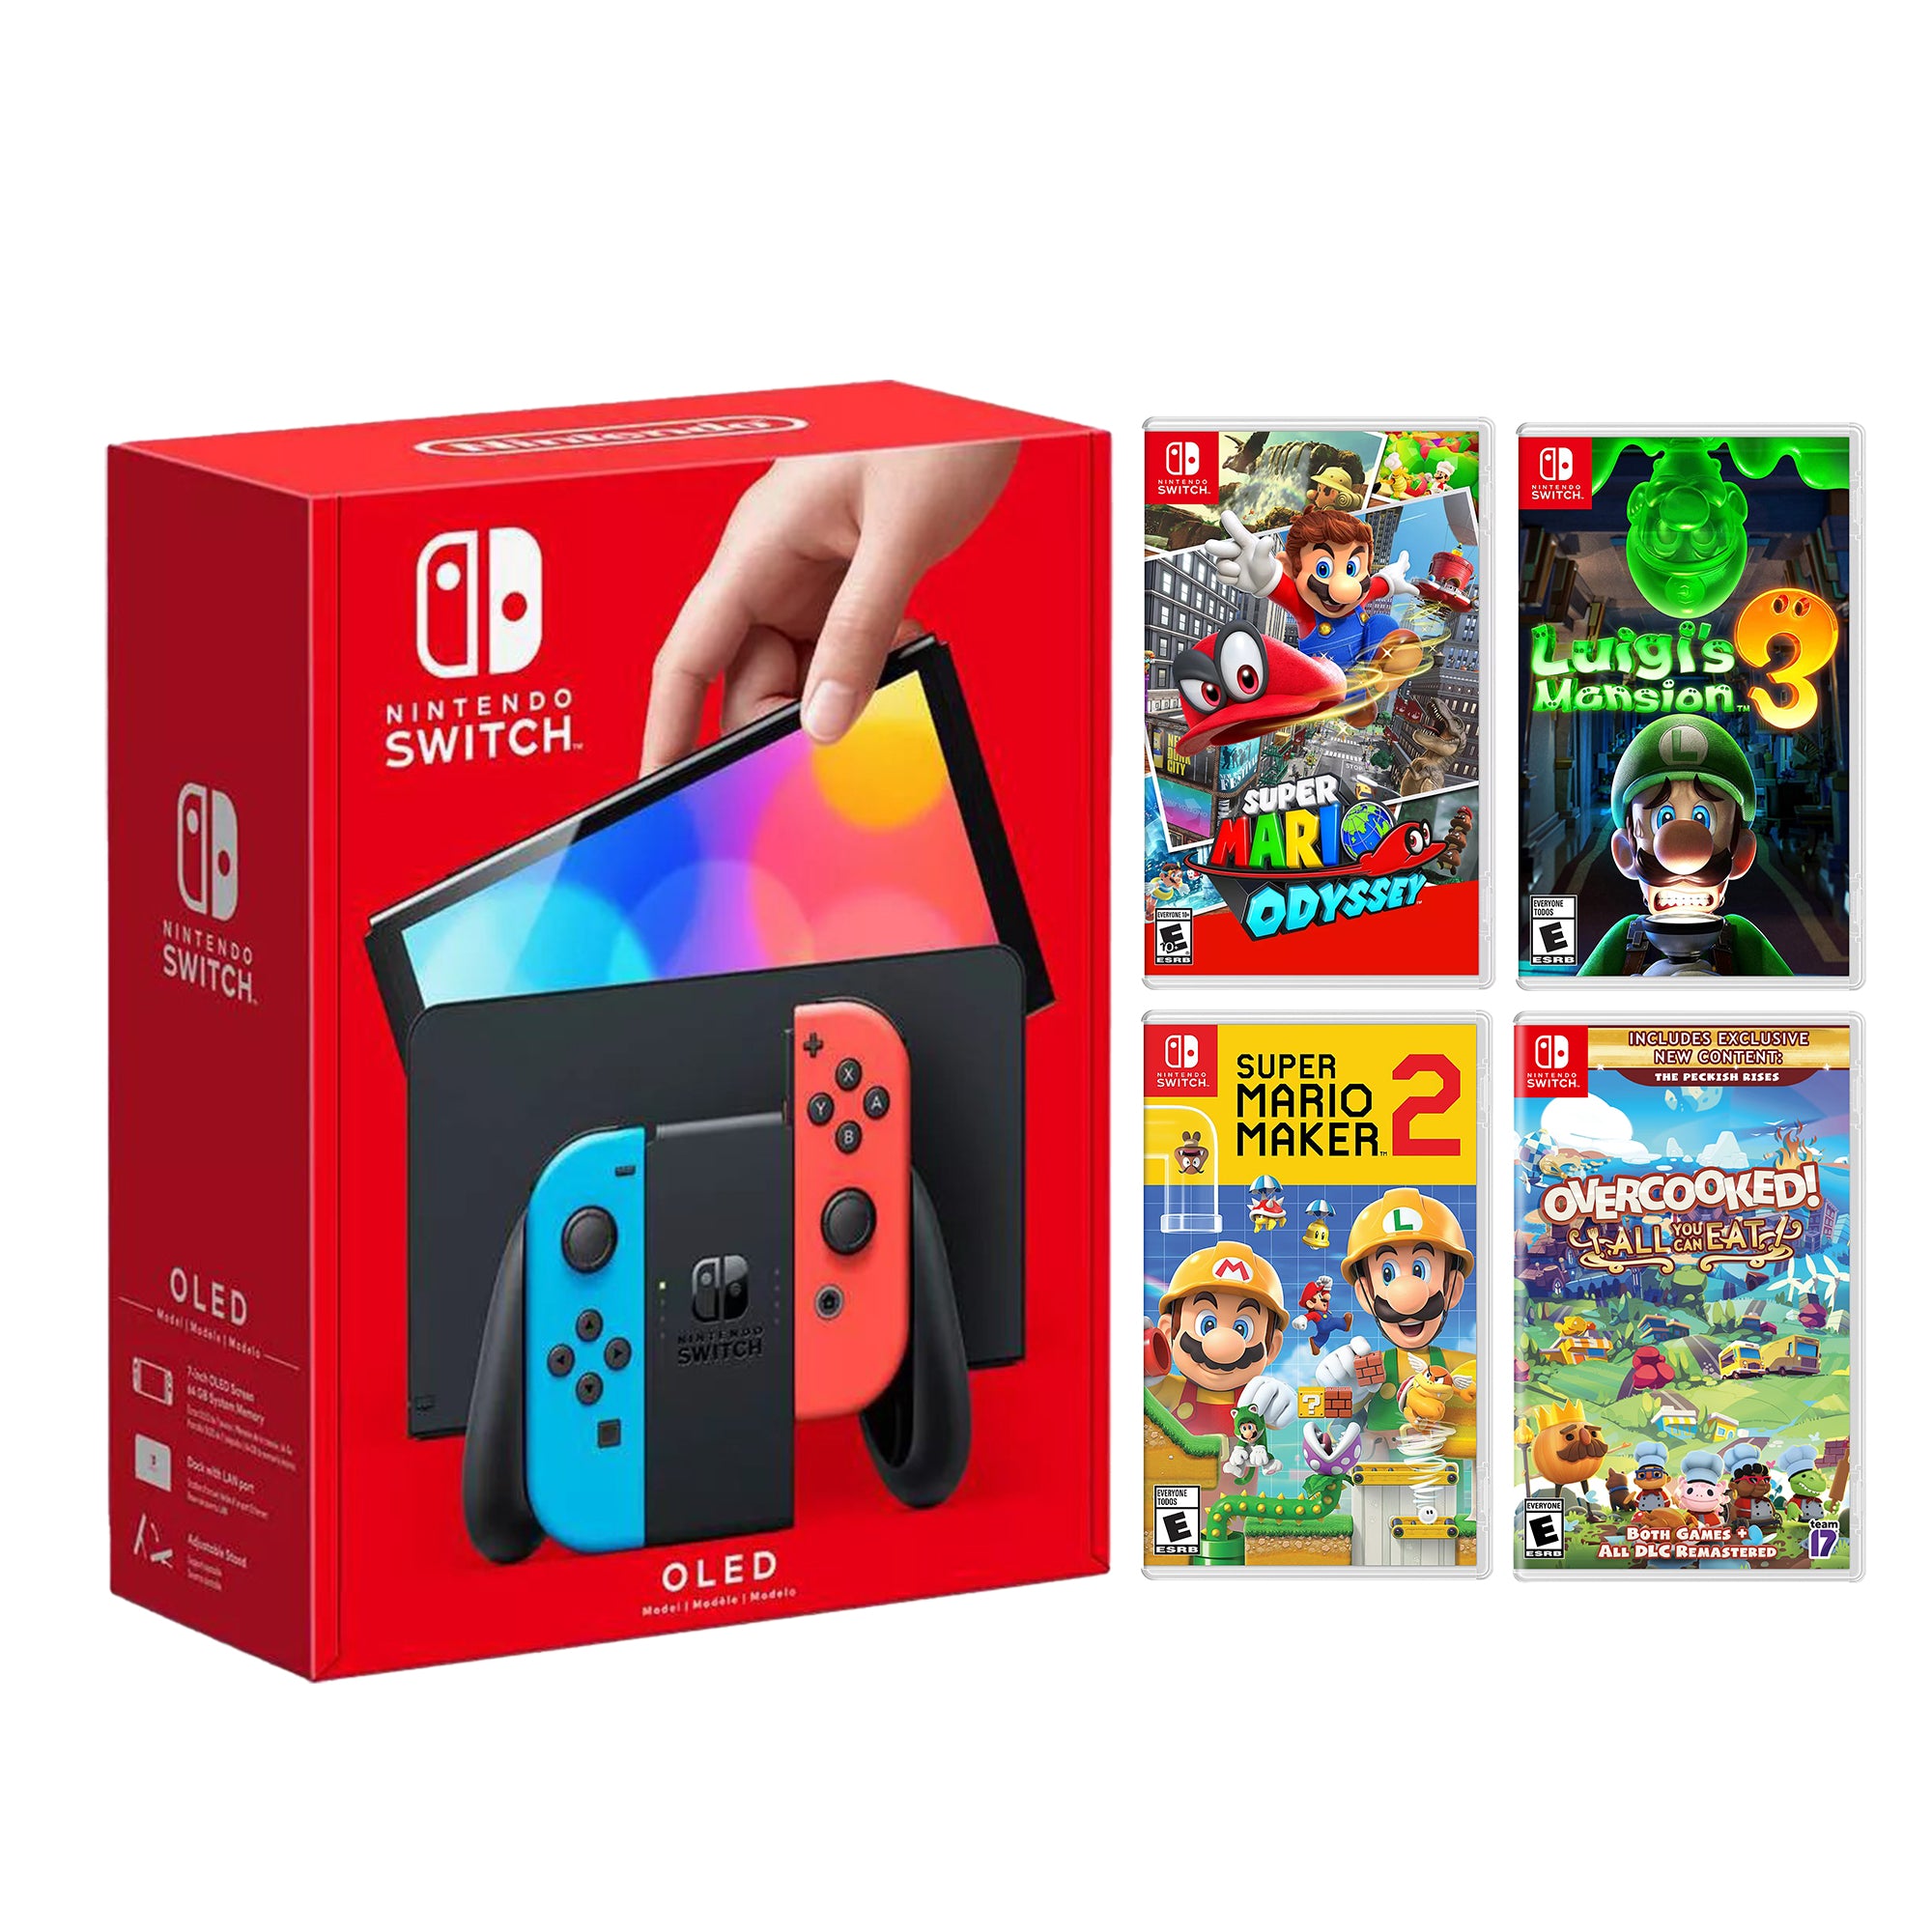 2021 New Nintendo Switch OLED Model Neon Red & Blue Joy Con 64GB Console HD Screen & LAN-Port Dock with Multiplayer 4 Game Co-Op Set and Mytrix Accessories - Local Co-op Games Best for Two Players